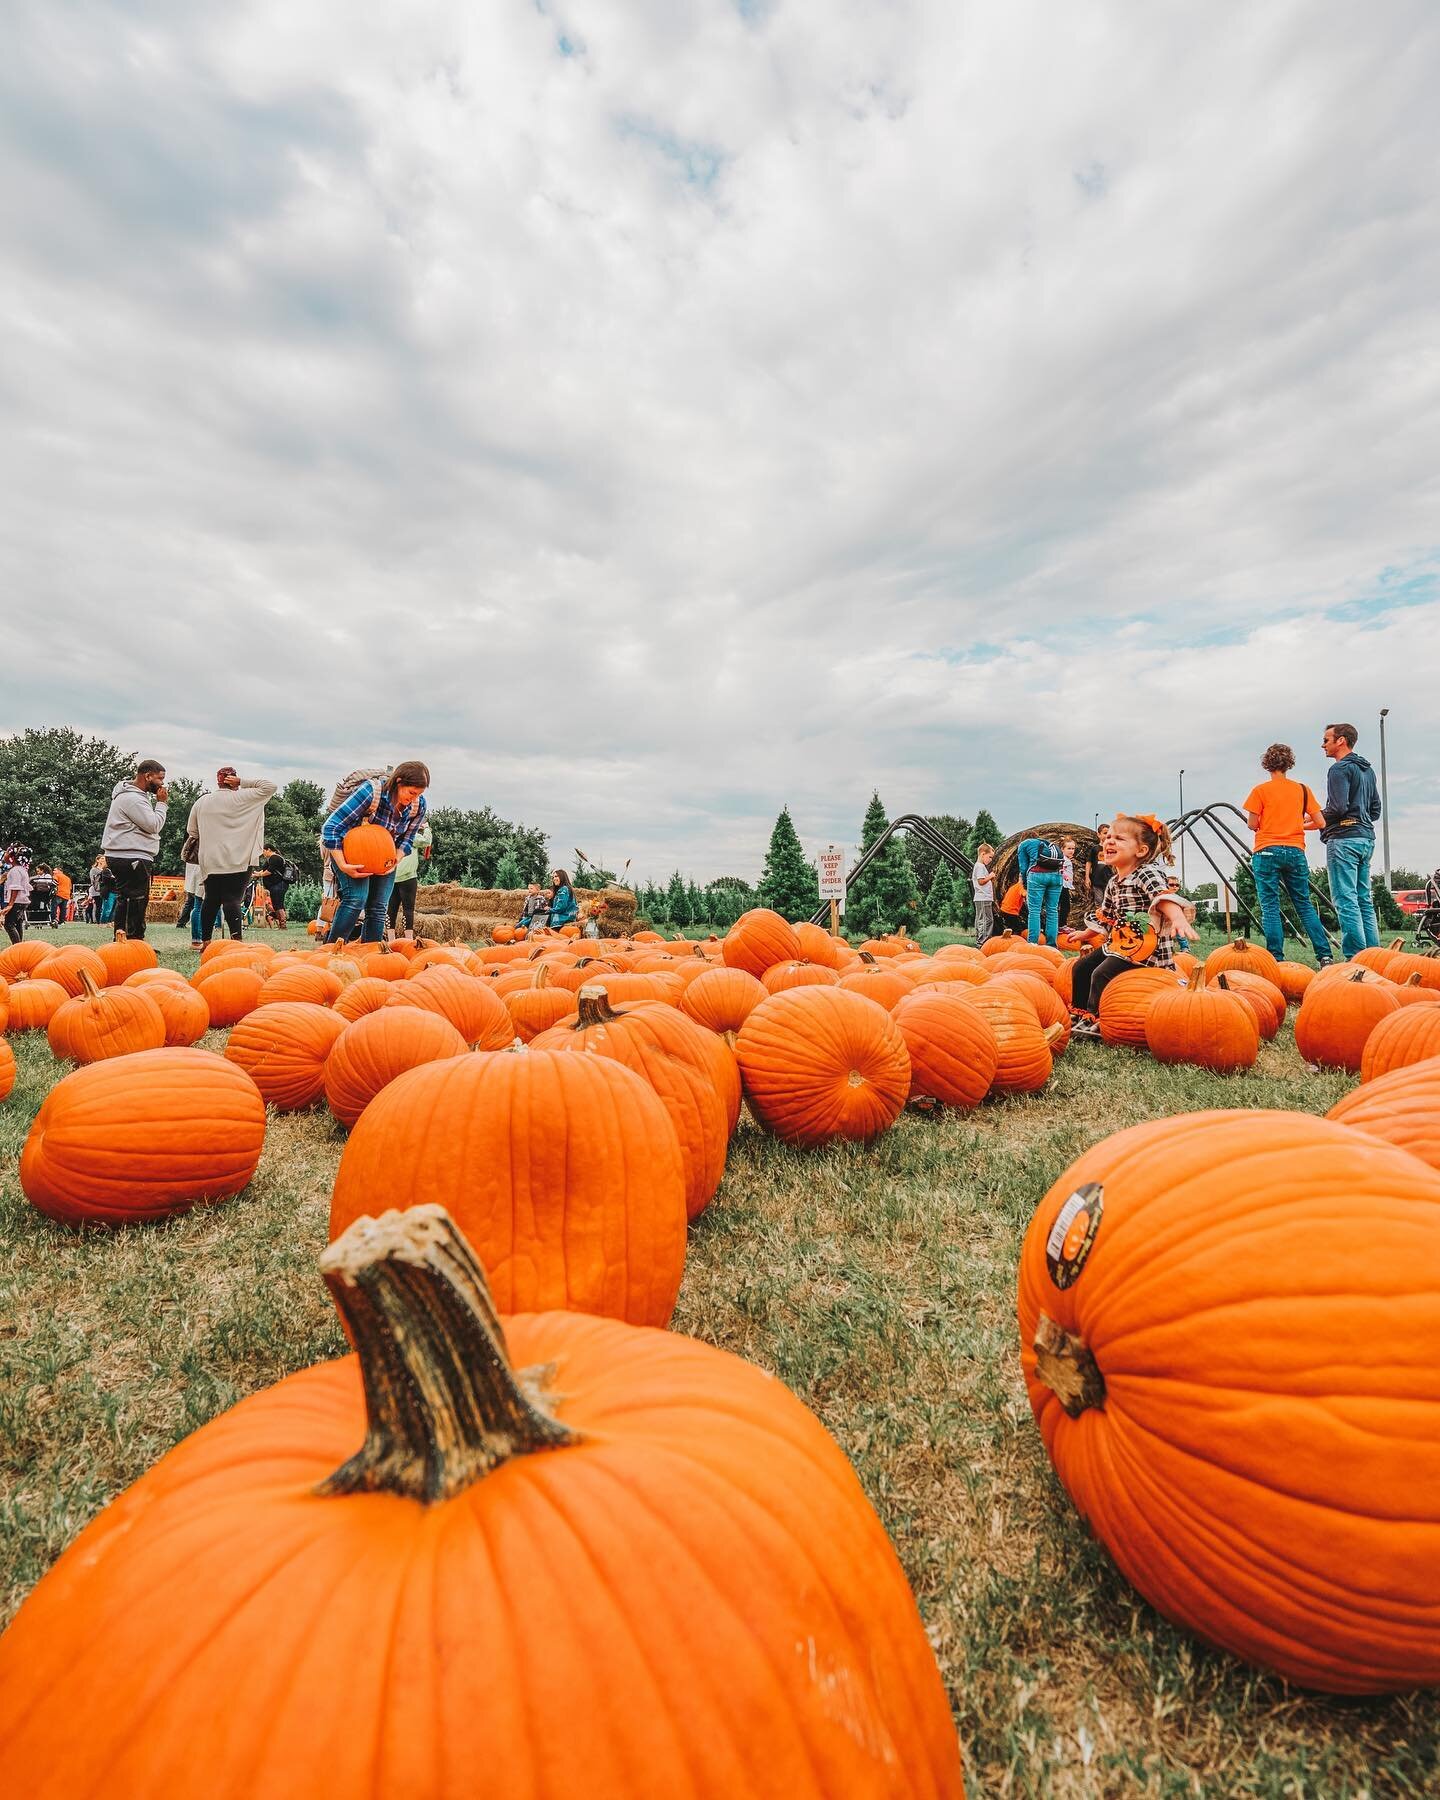 TODAY&rsquo;S THE DAY &bull; Come on out after school today at 4pm to help us kick off Pumpkin Patch 2020! We&rsquo;re so excited to see y&rsquo;all again. Don&rsquo;t forget your mask! 🍁🌲

Entry: $7 per person (age 2+) &bull; Pumpkins and Attracti